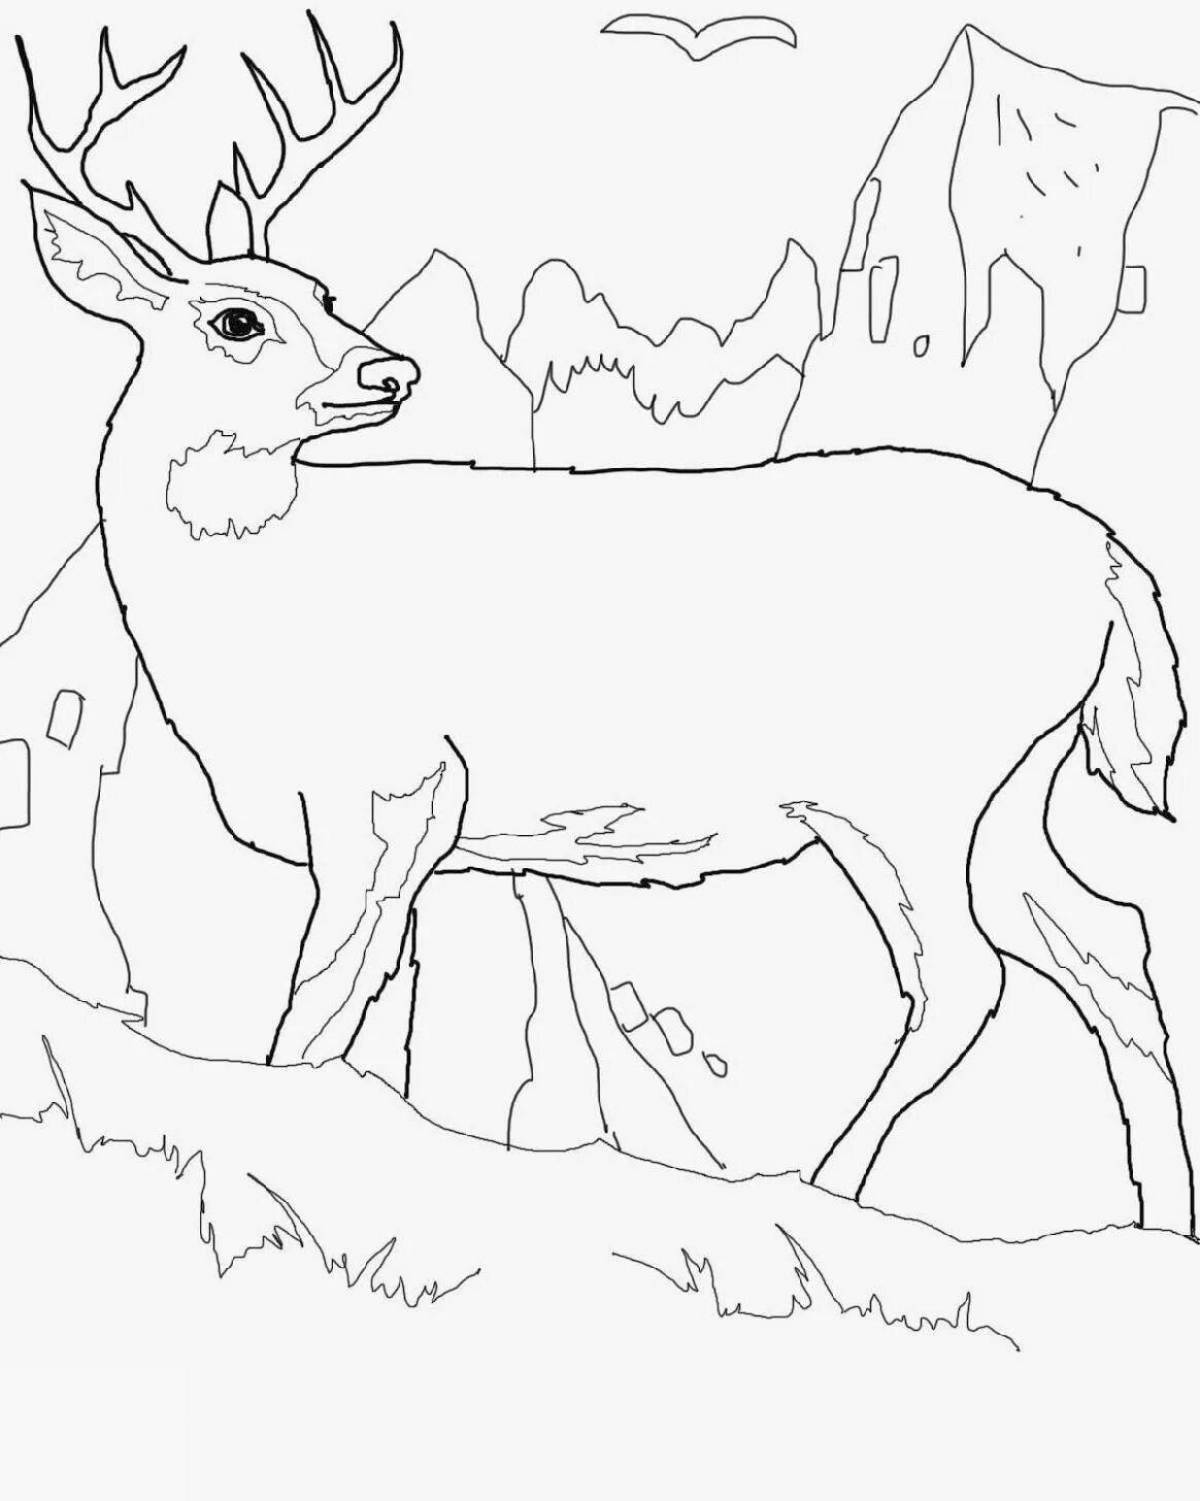 Cute northern animals coloring pages for kids